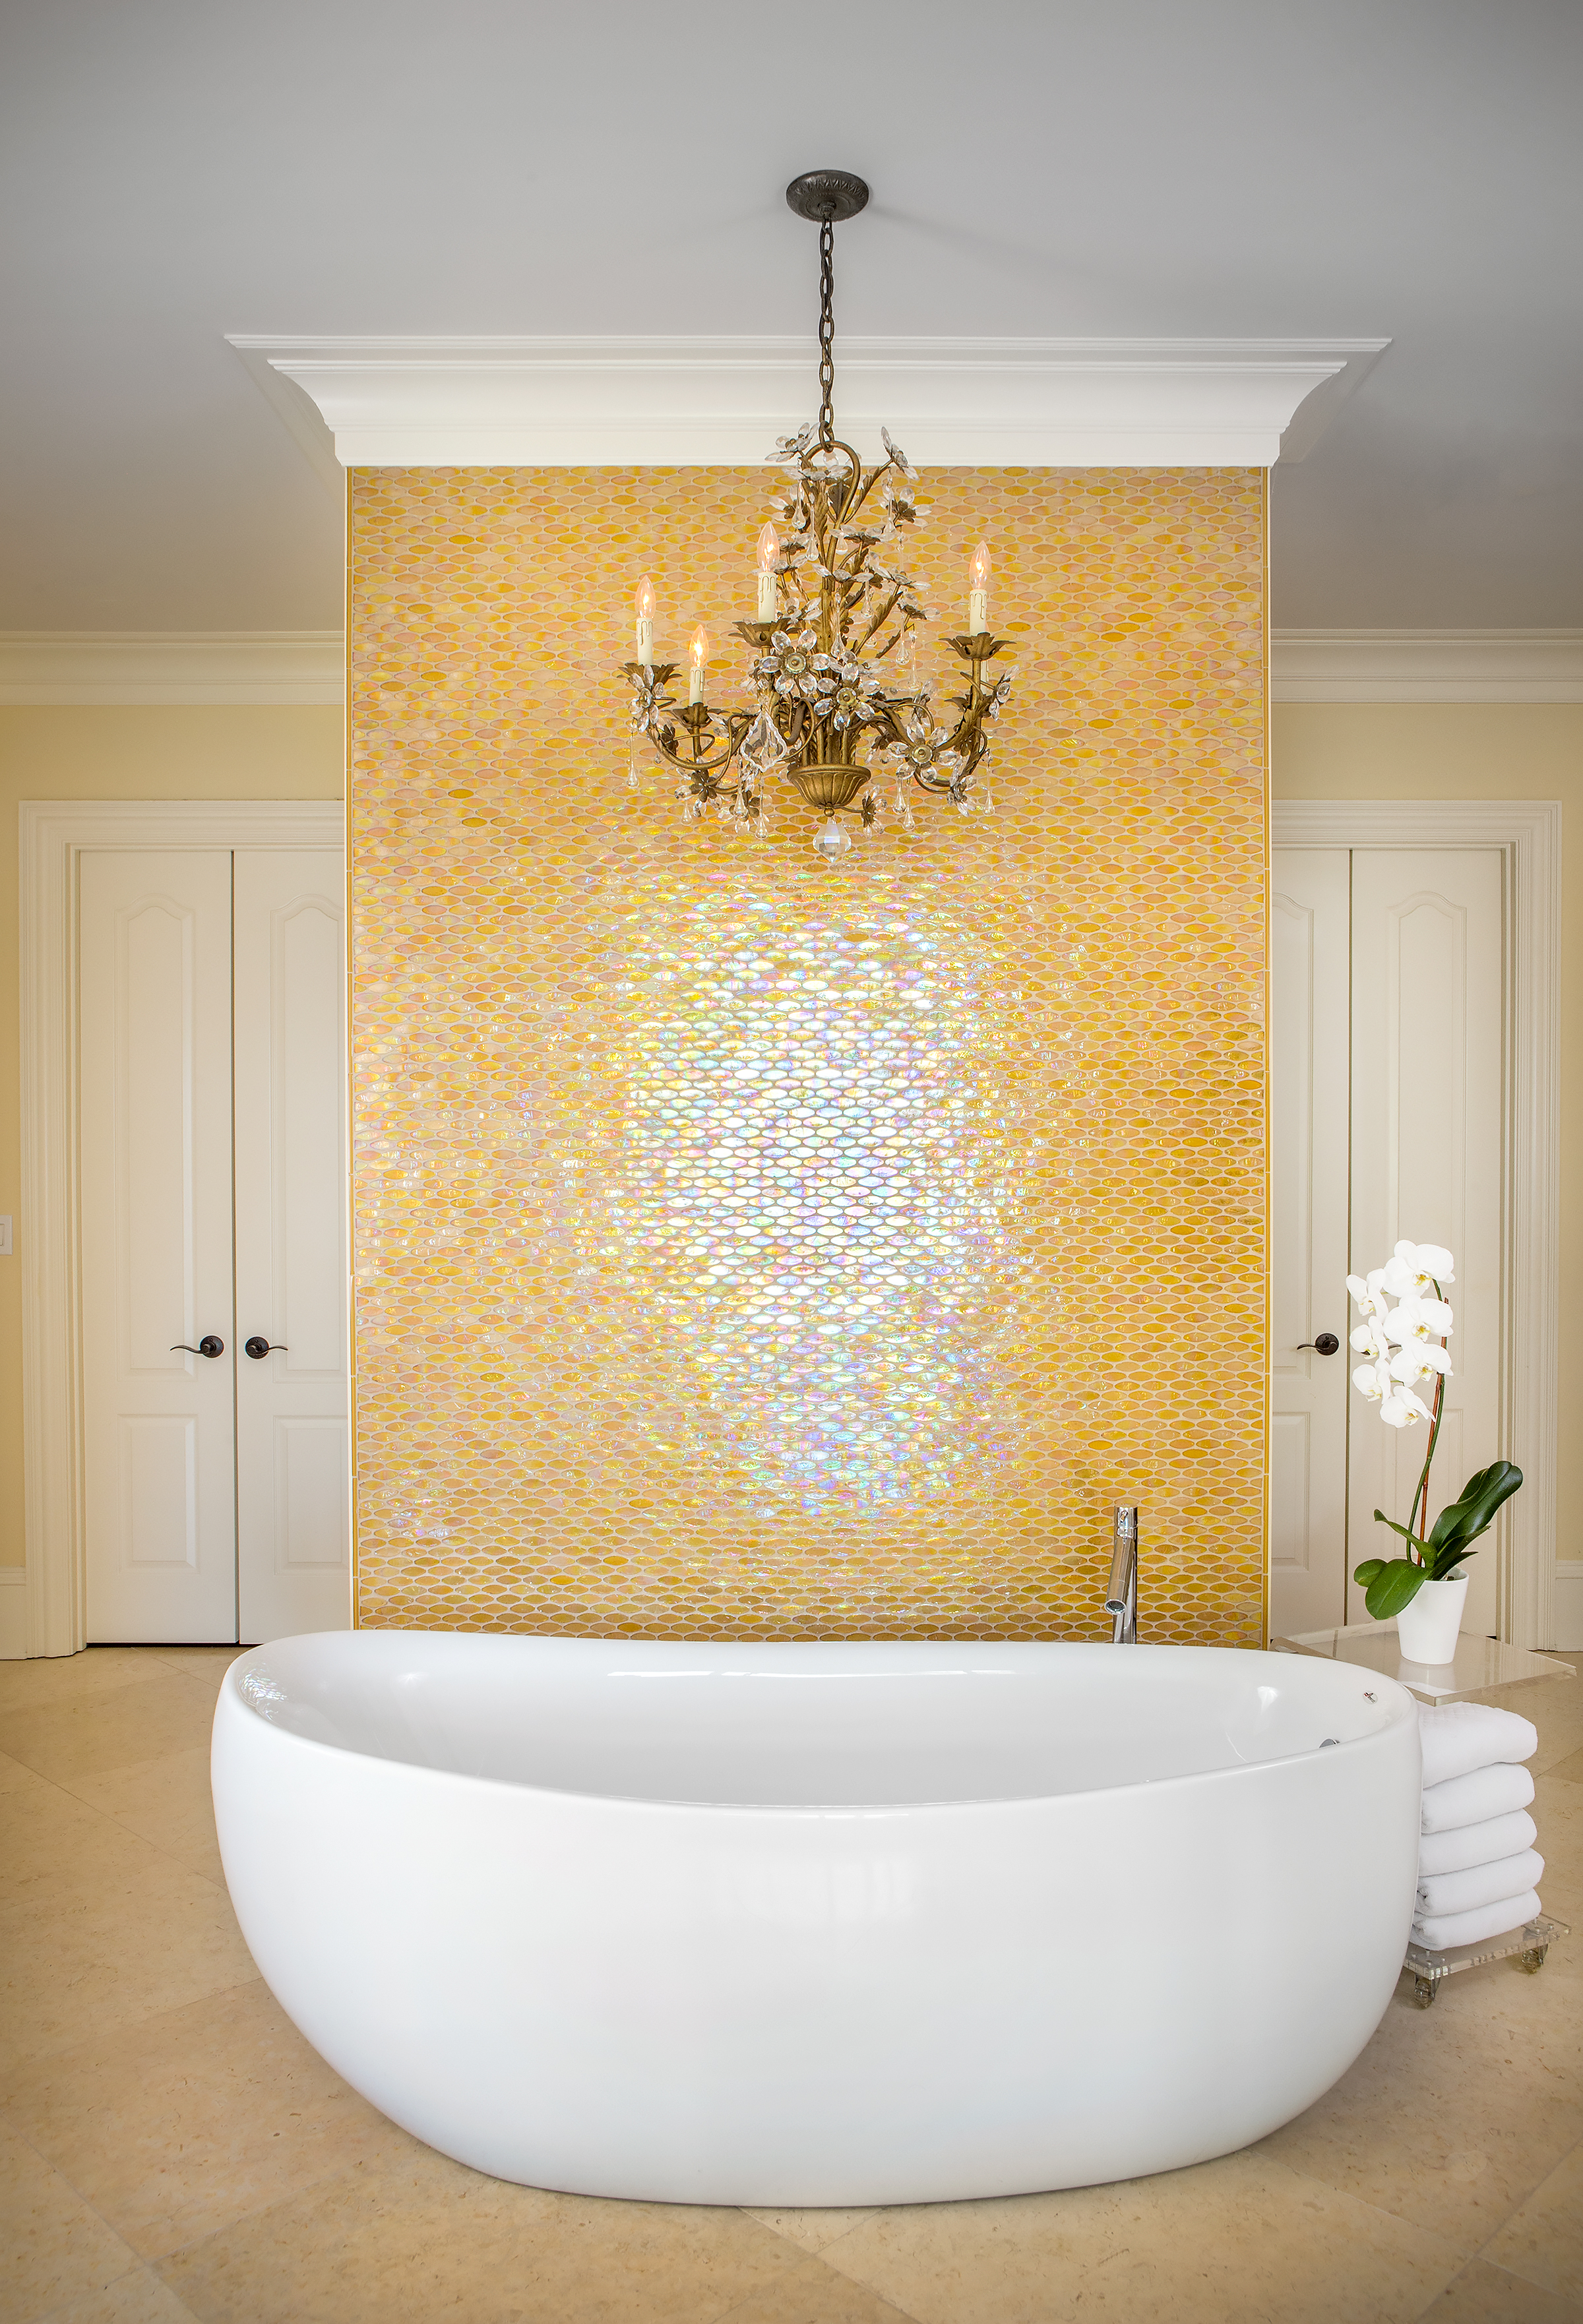 Esther Greenberg at the Tile Center assisted Marcie Baker with her selection of oval glass mosaics with pearl essences to coordinate with the freestanding bathtub in her luxurious, dramatic bathroom.